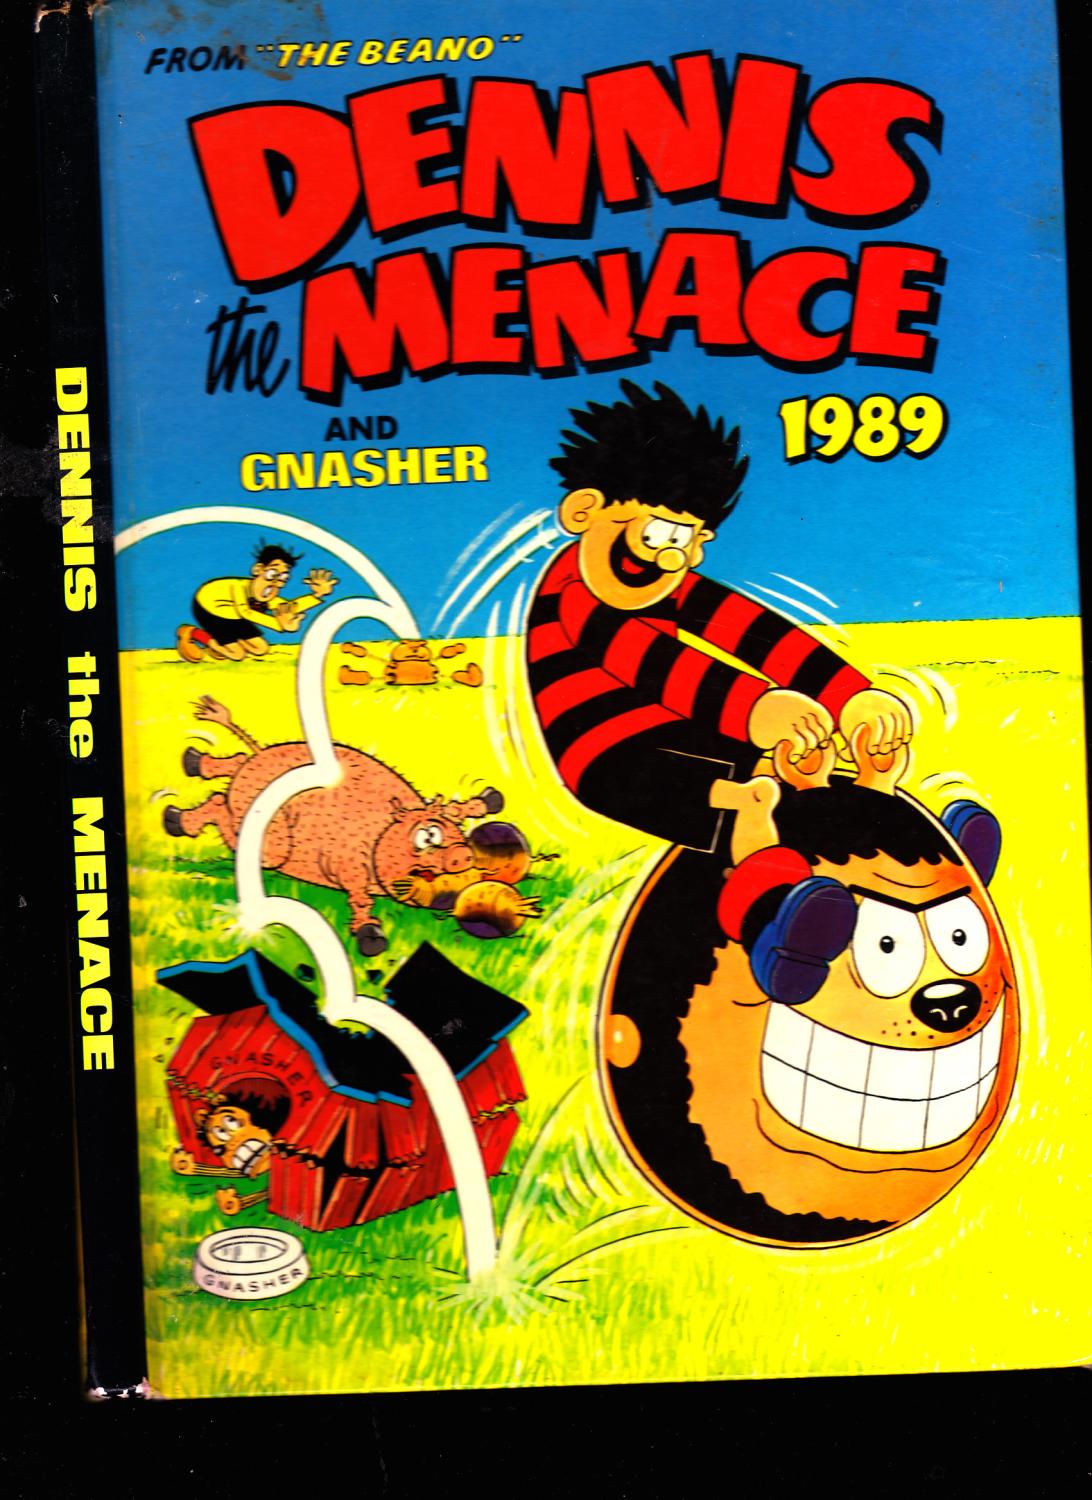 price clipped. The Beano Book 1989 good condition hardcover 